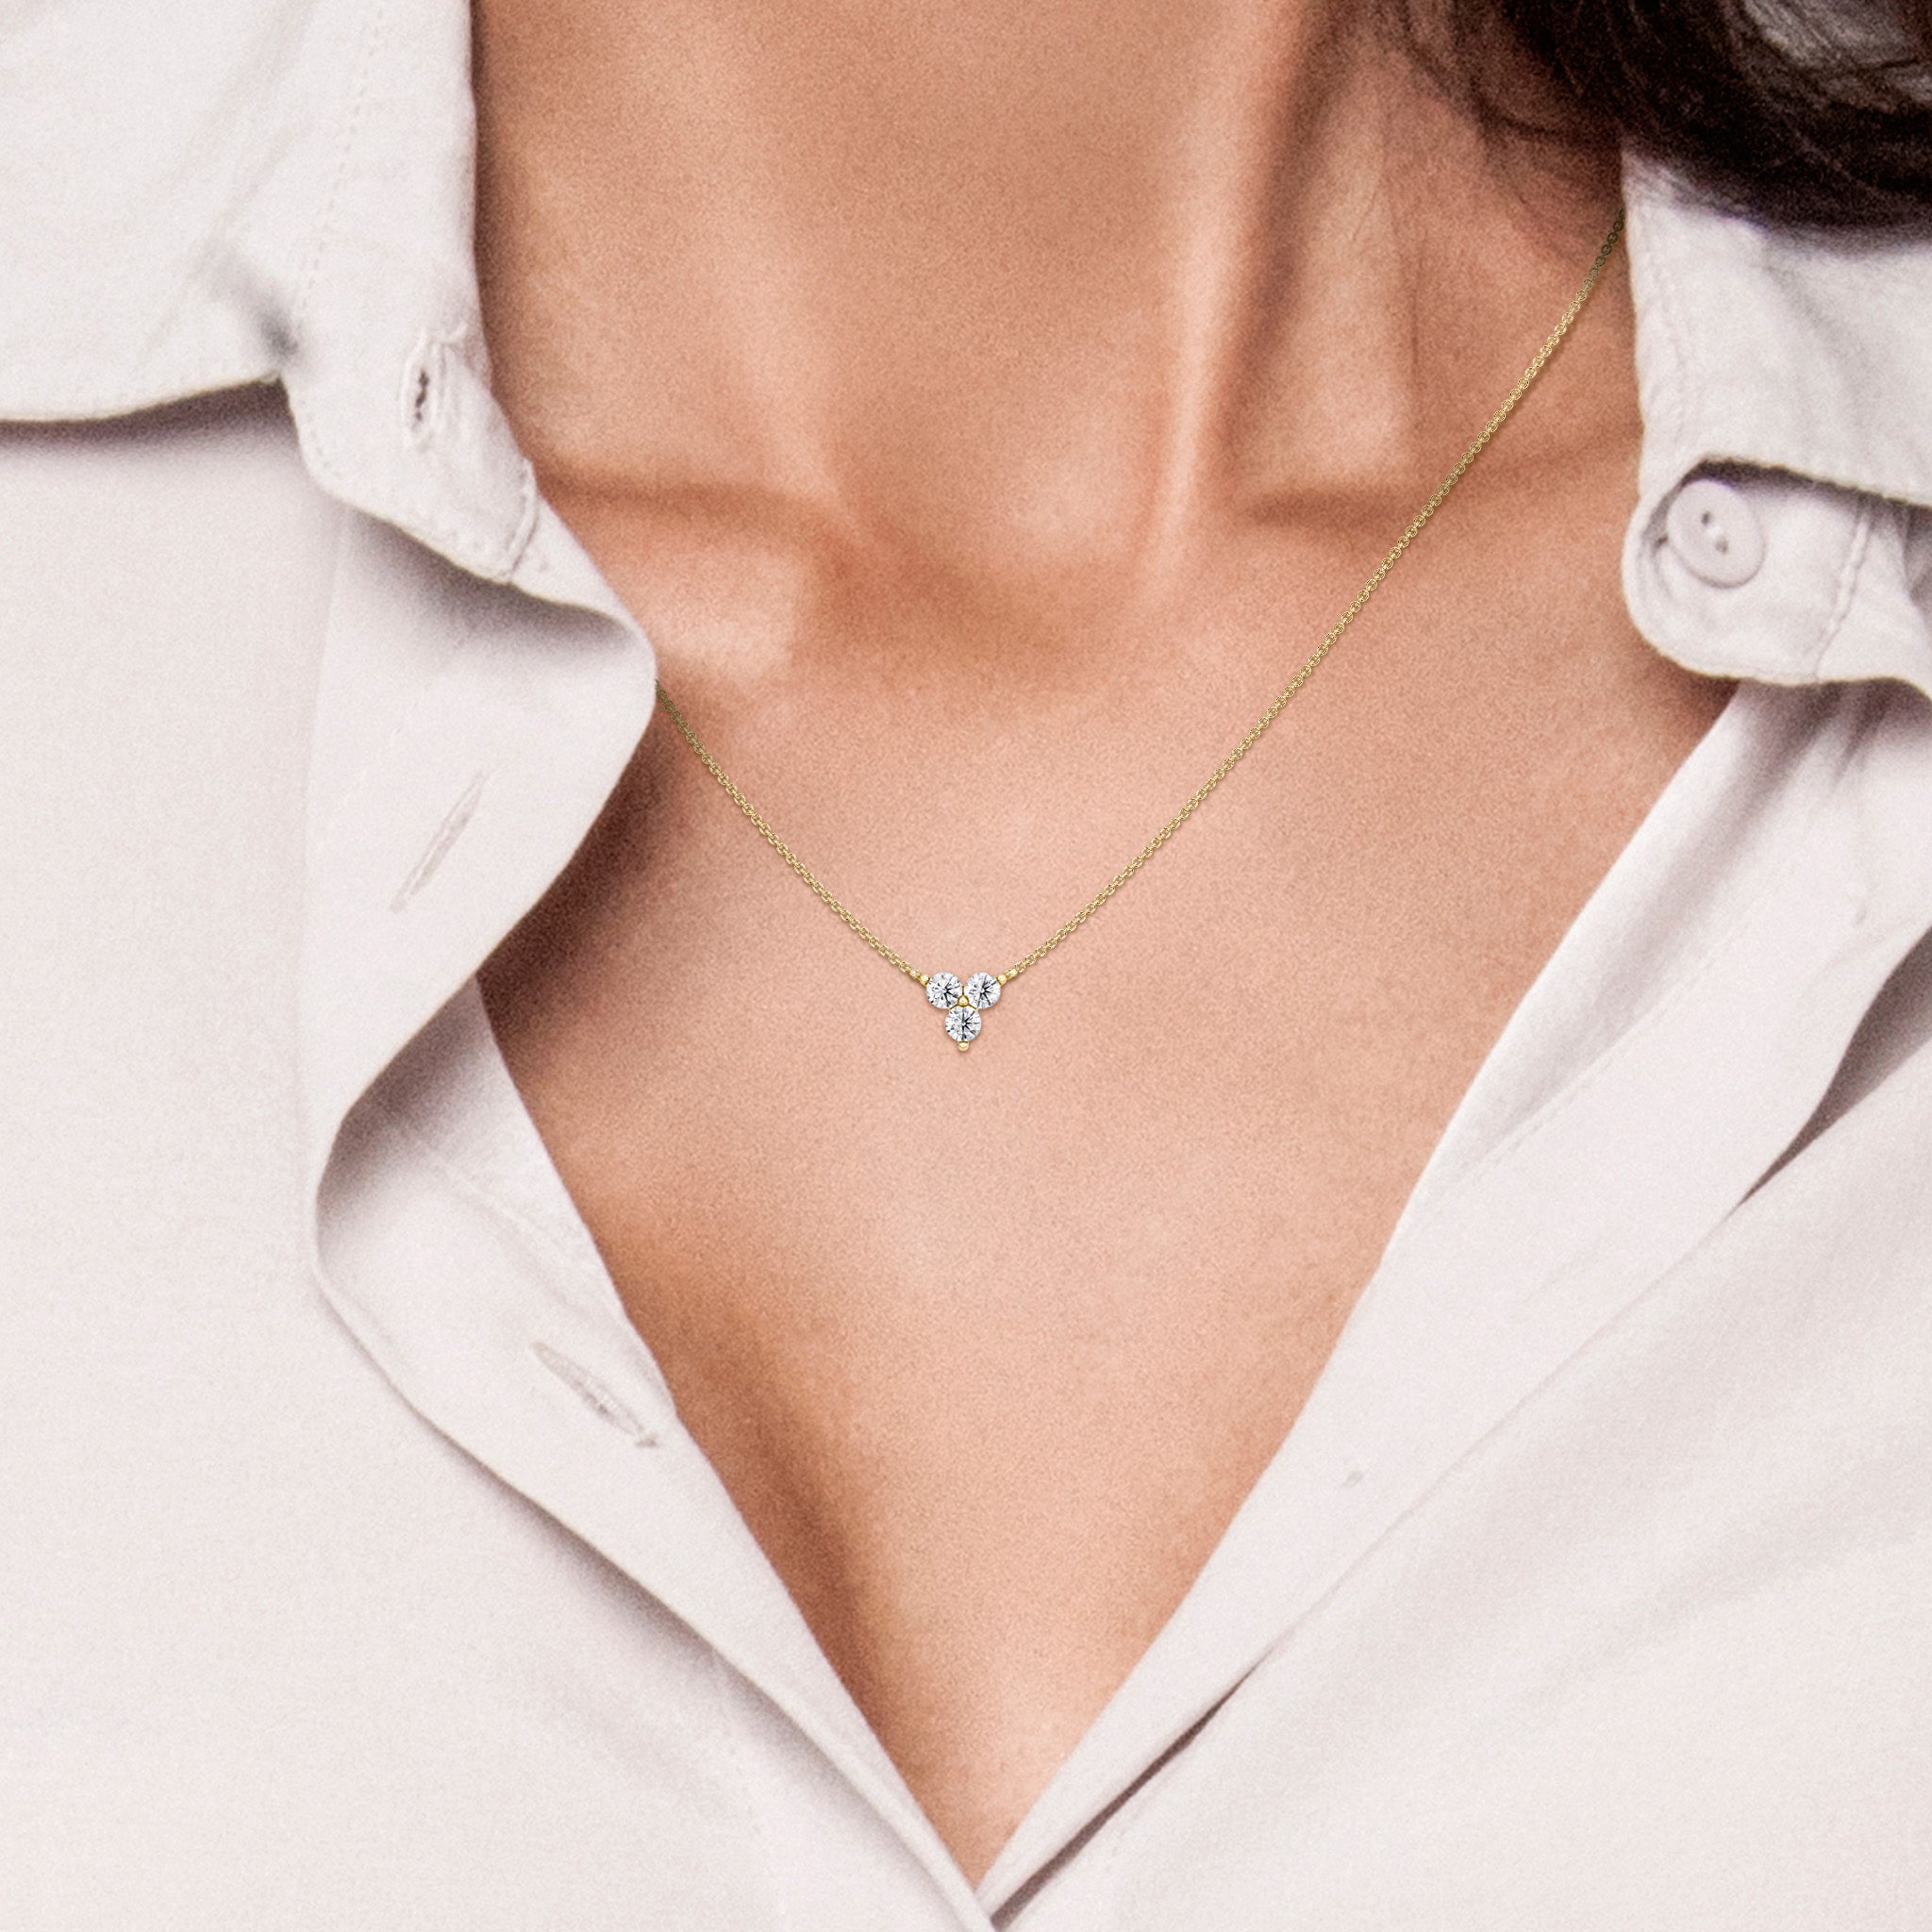 Shimansky - Women Wearing the Clover Diamond Necklace crafted in 14K Yellow Gold